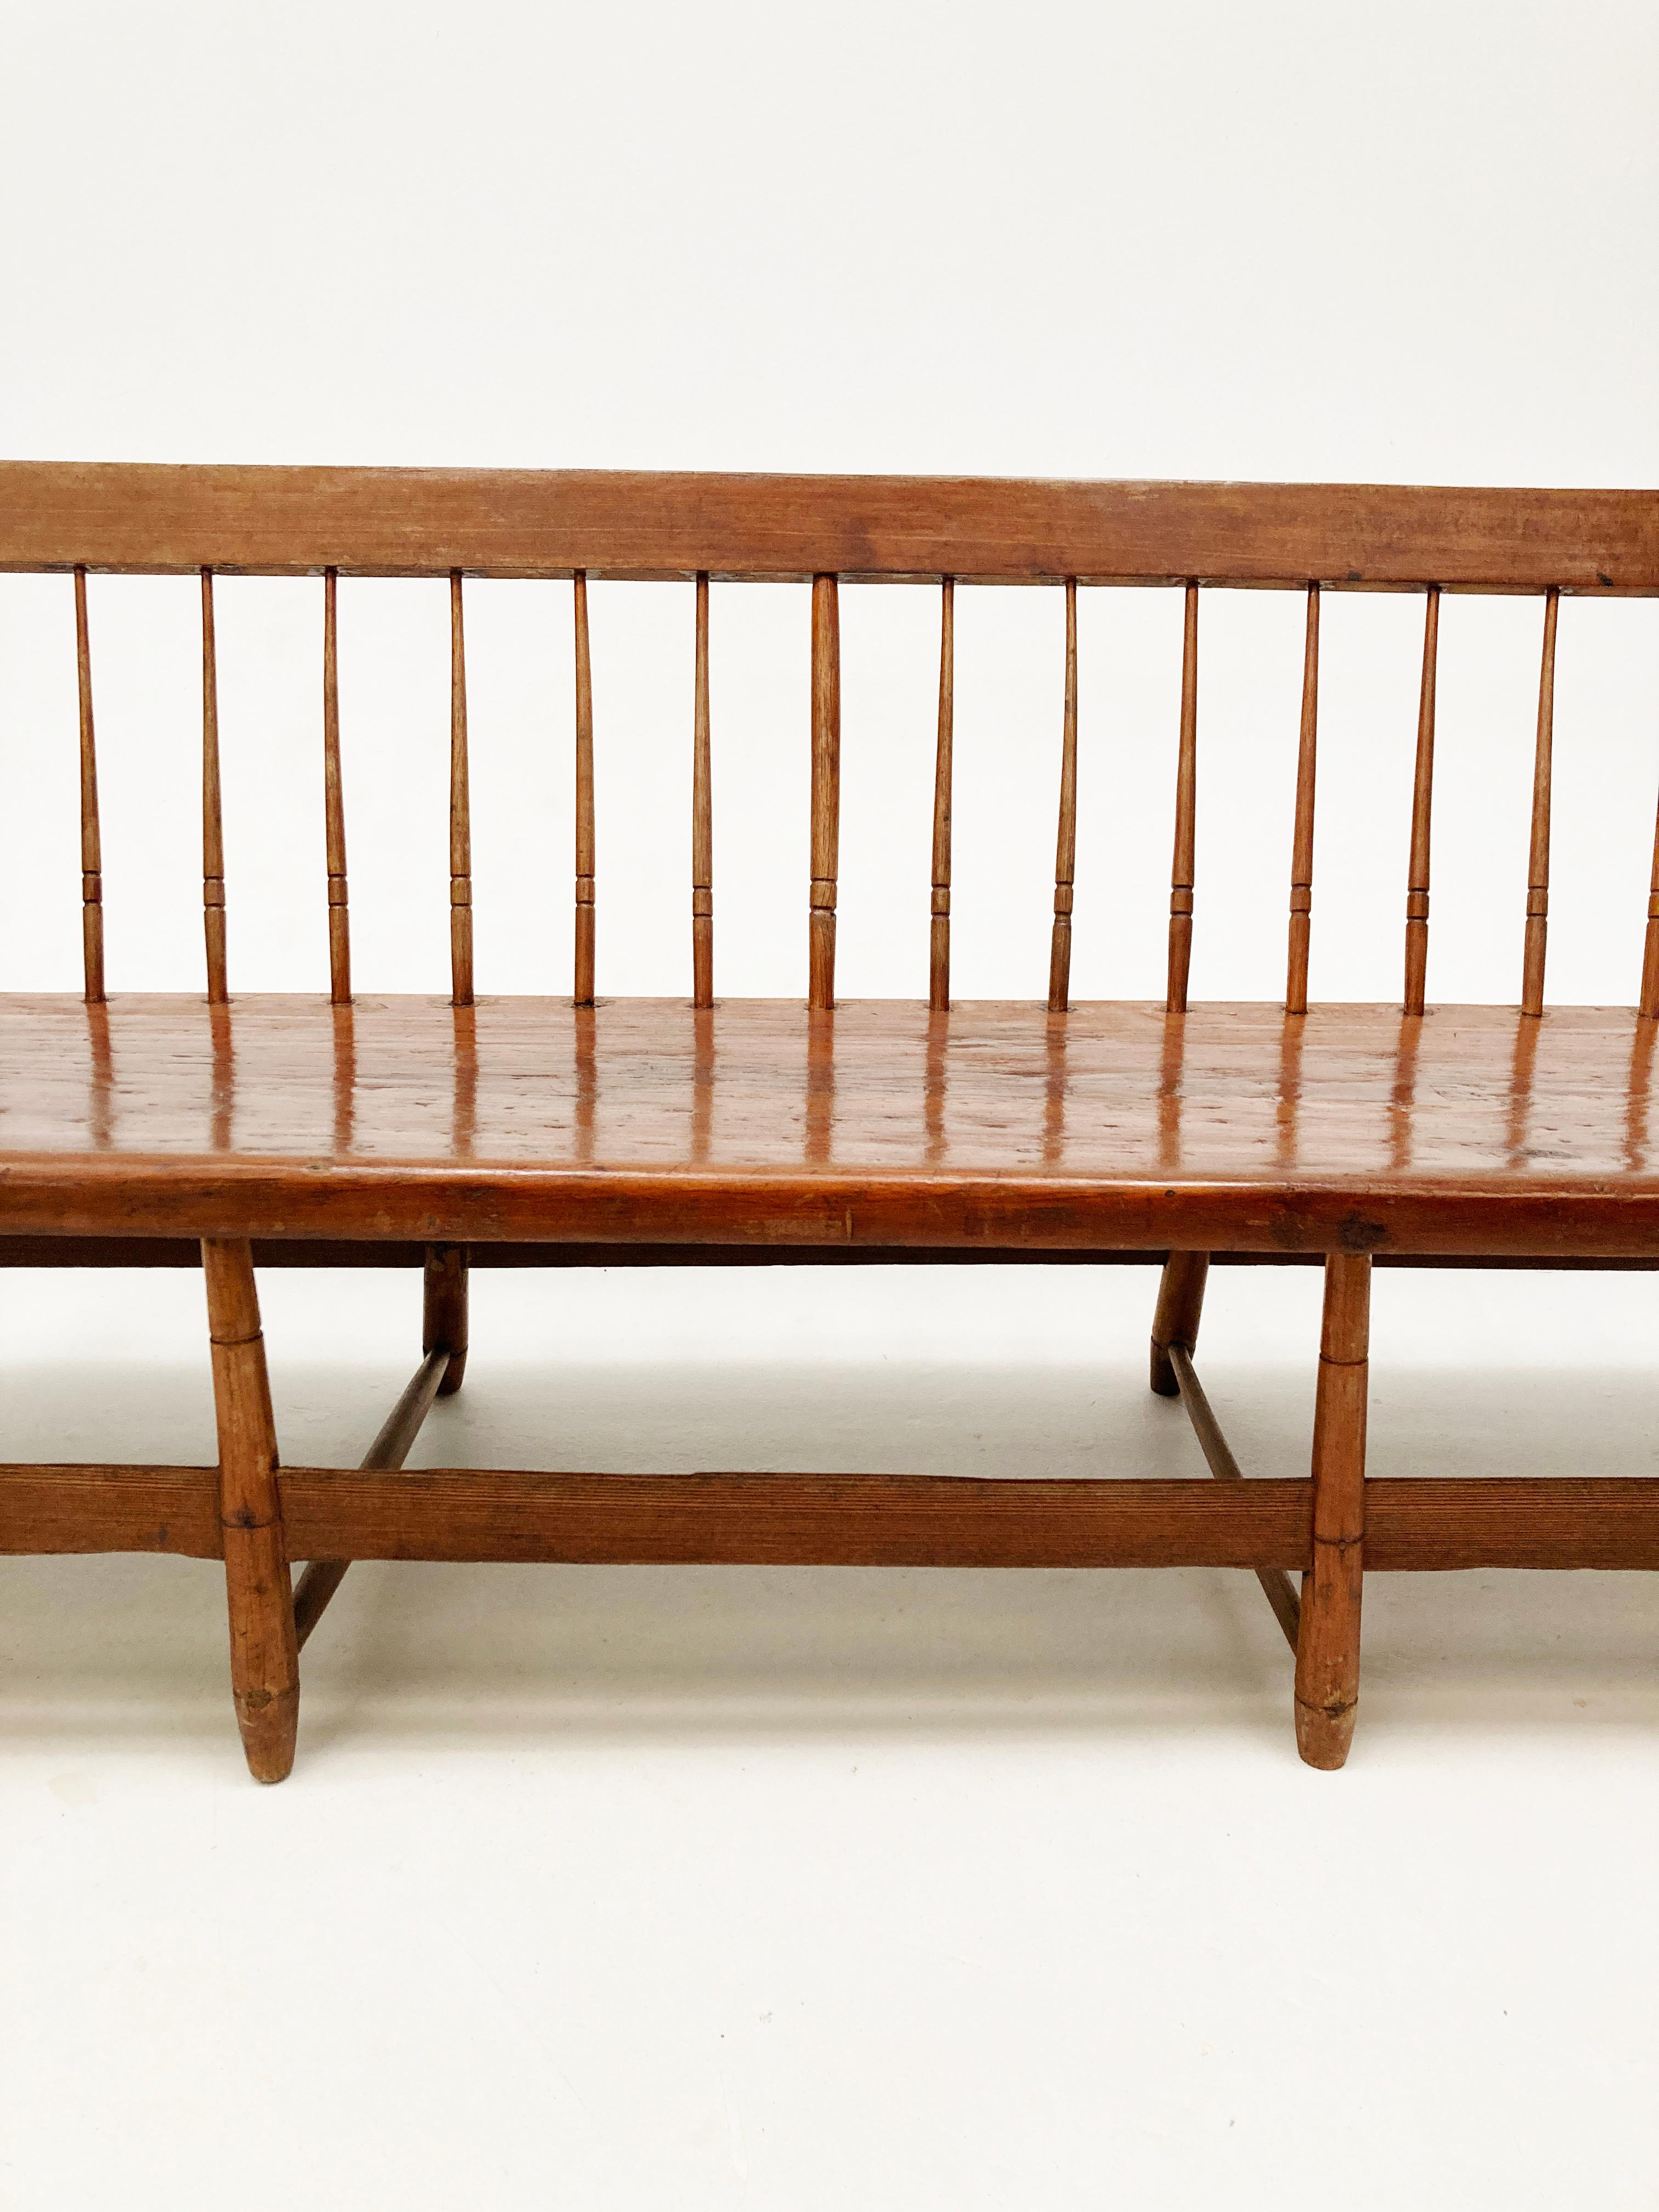 American Classical Early 19th Century Early American Pine Windsor Spindle-Back Meeting House Bench